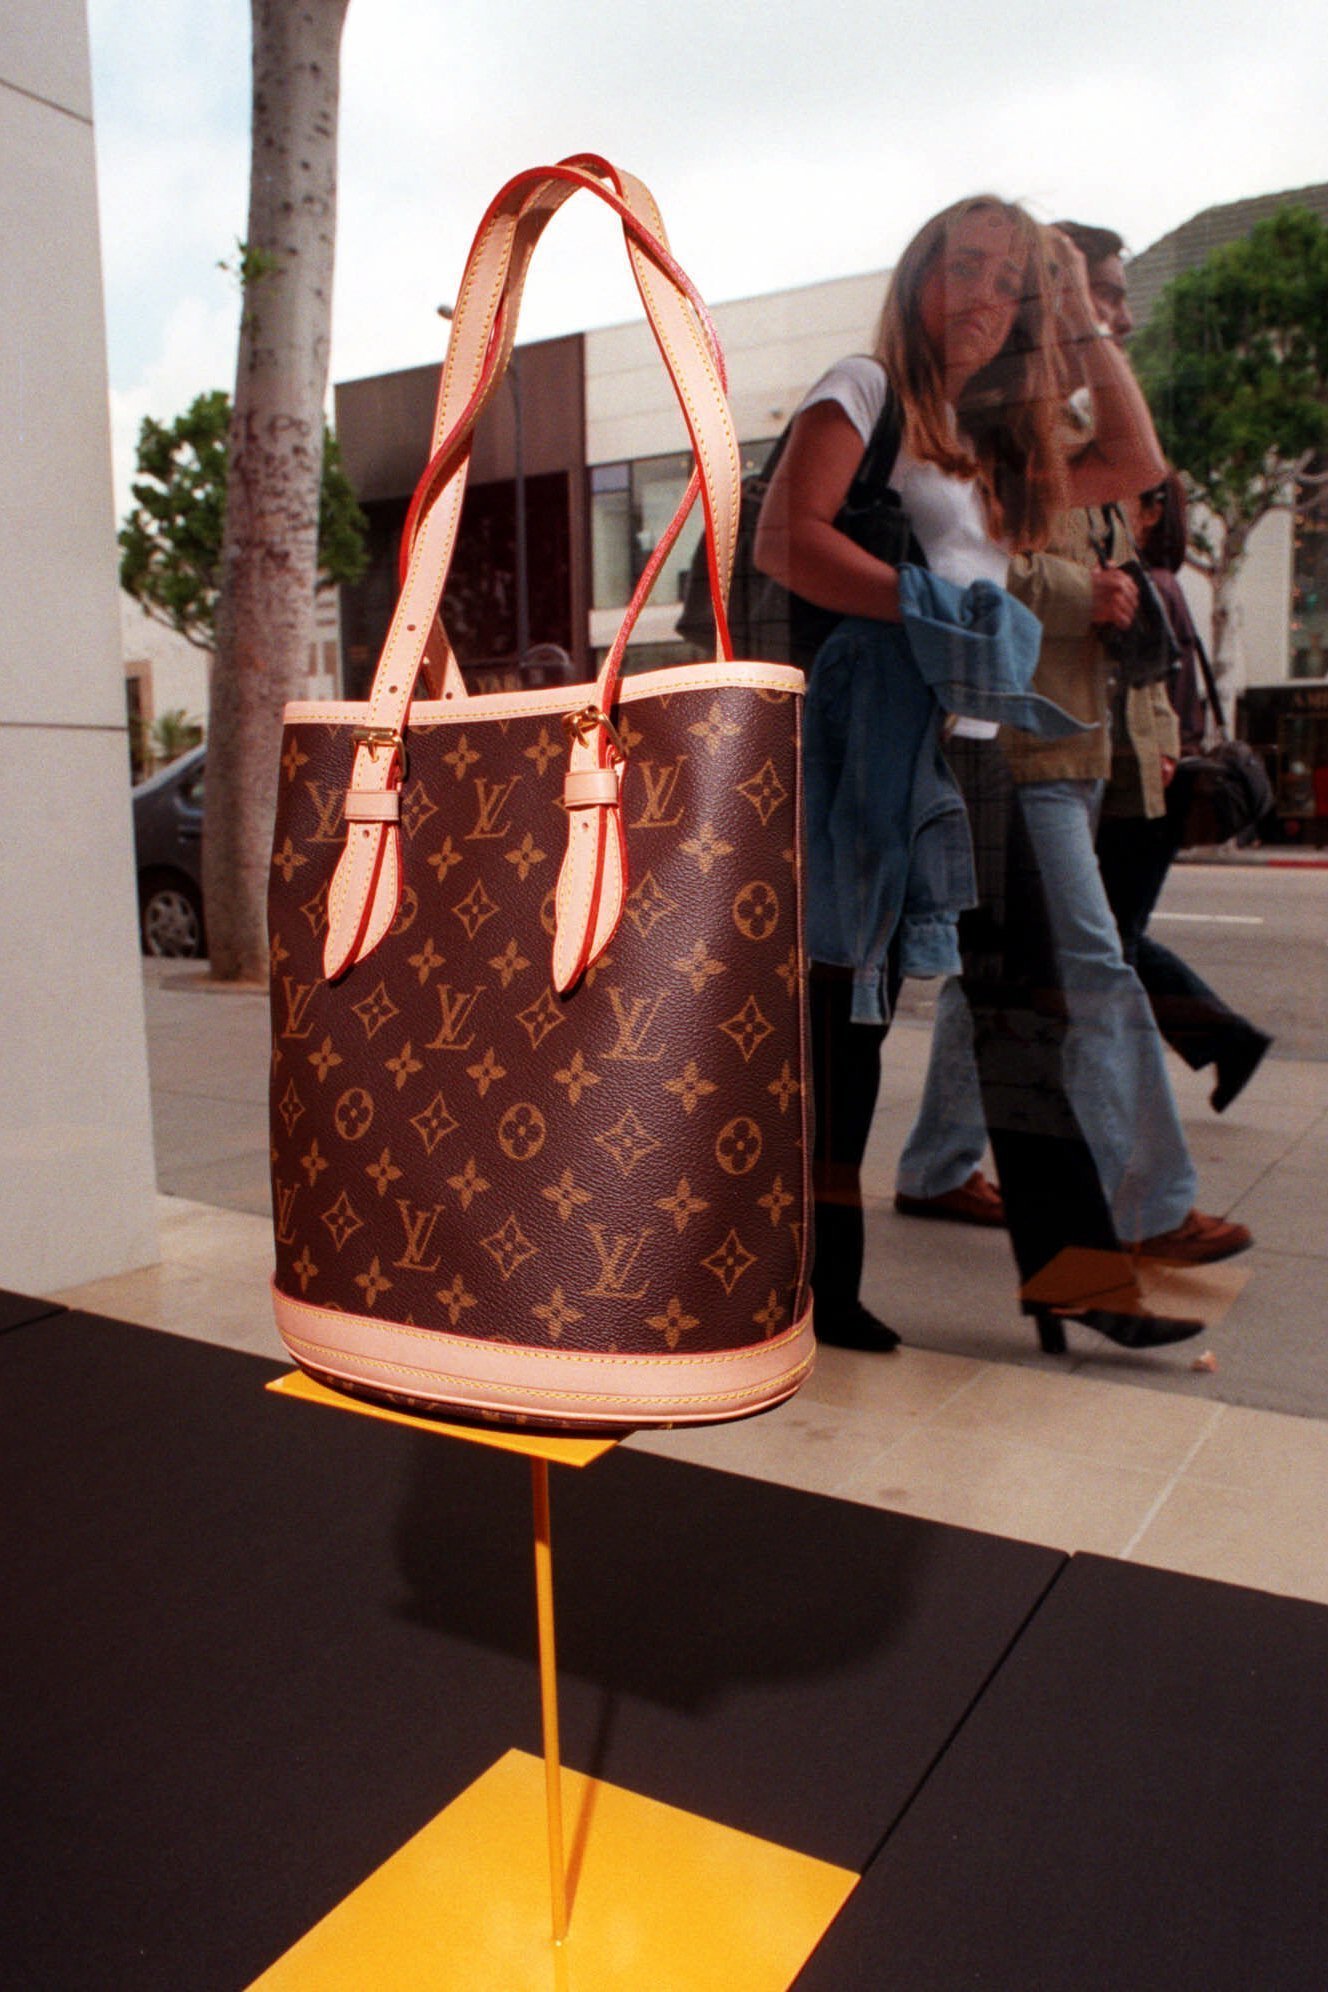 Why Louis Vuitton, Gucci and Prada are in trouble - Chicago Tribune